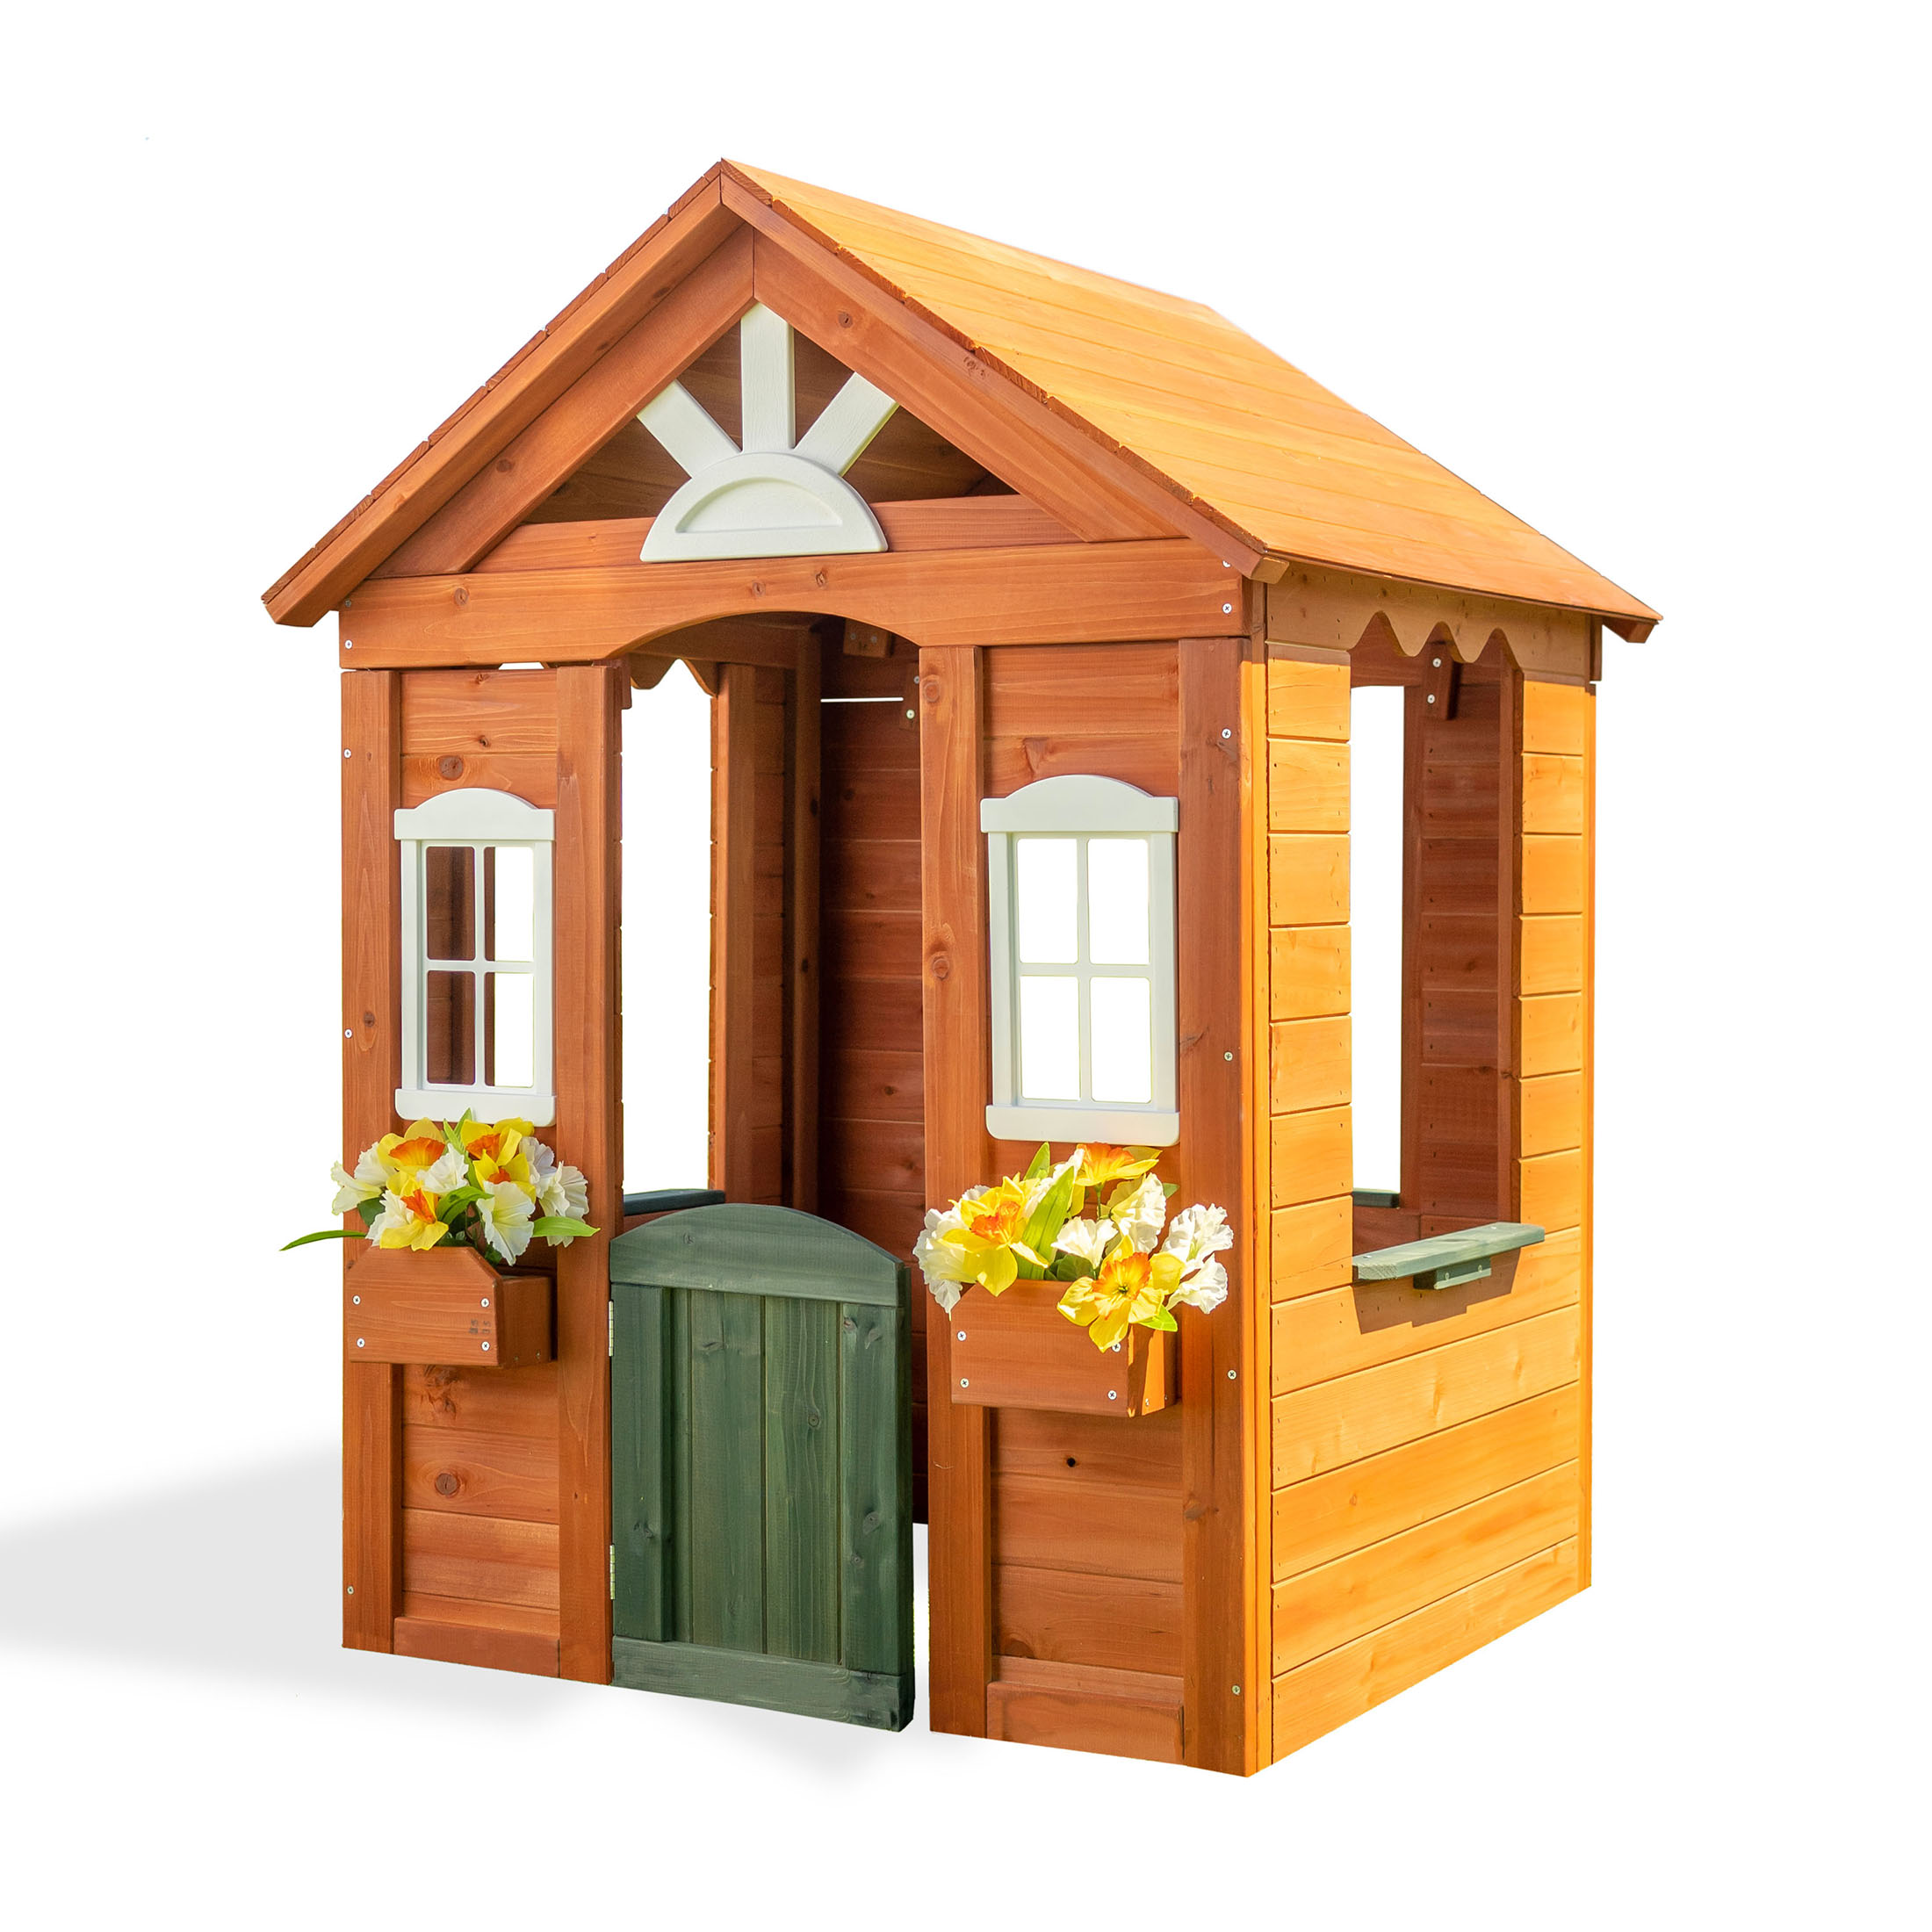 Sportspower Bellevue Kids Wooden Playhouse with Fun Colored Working Front Door, White Trim Windows, and Flower Pot Holders - image 2 of 13